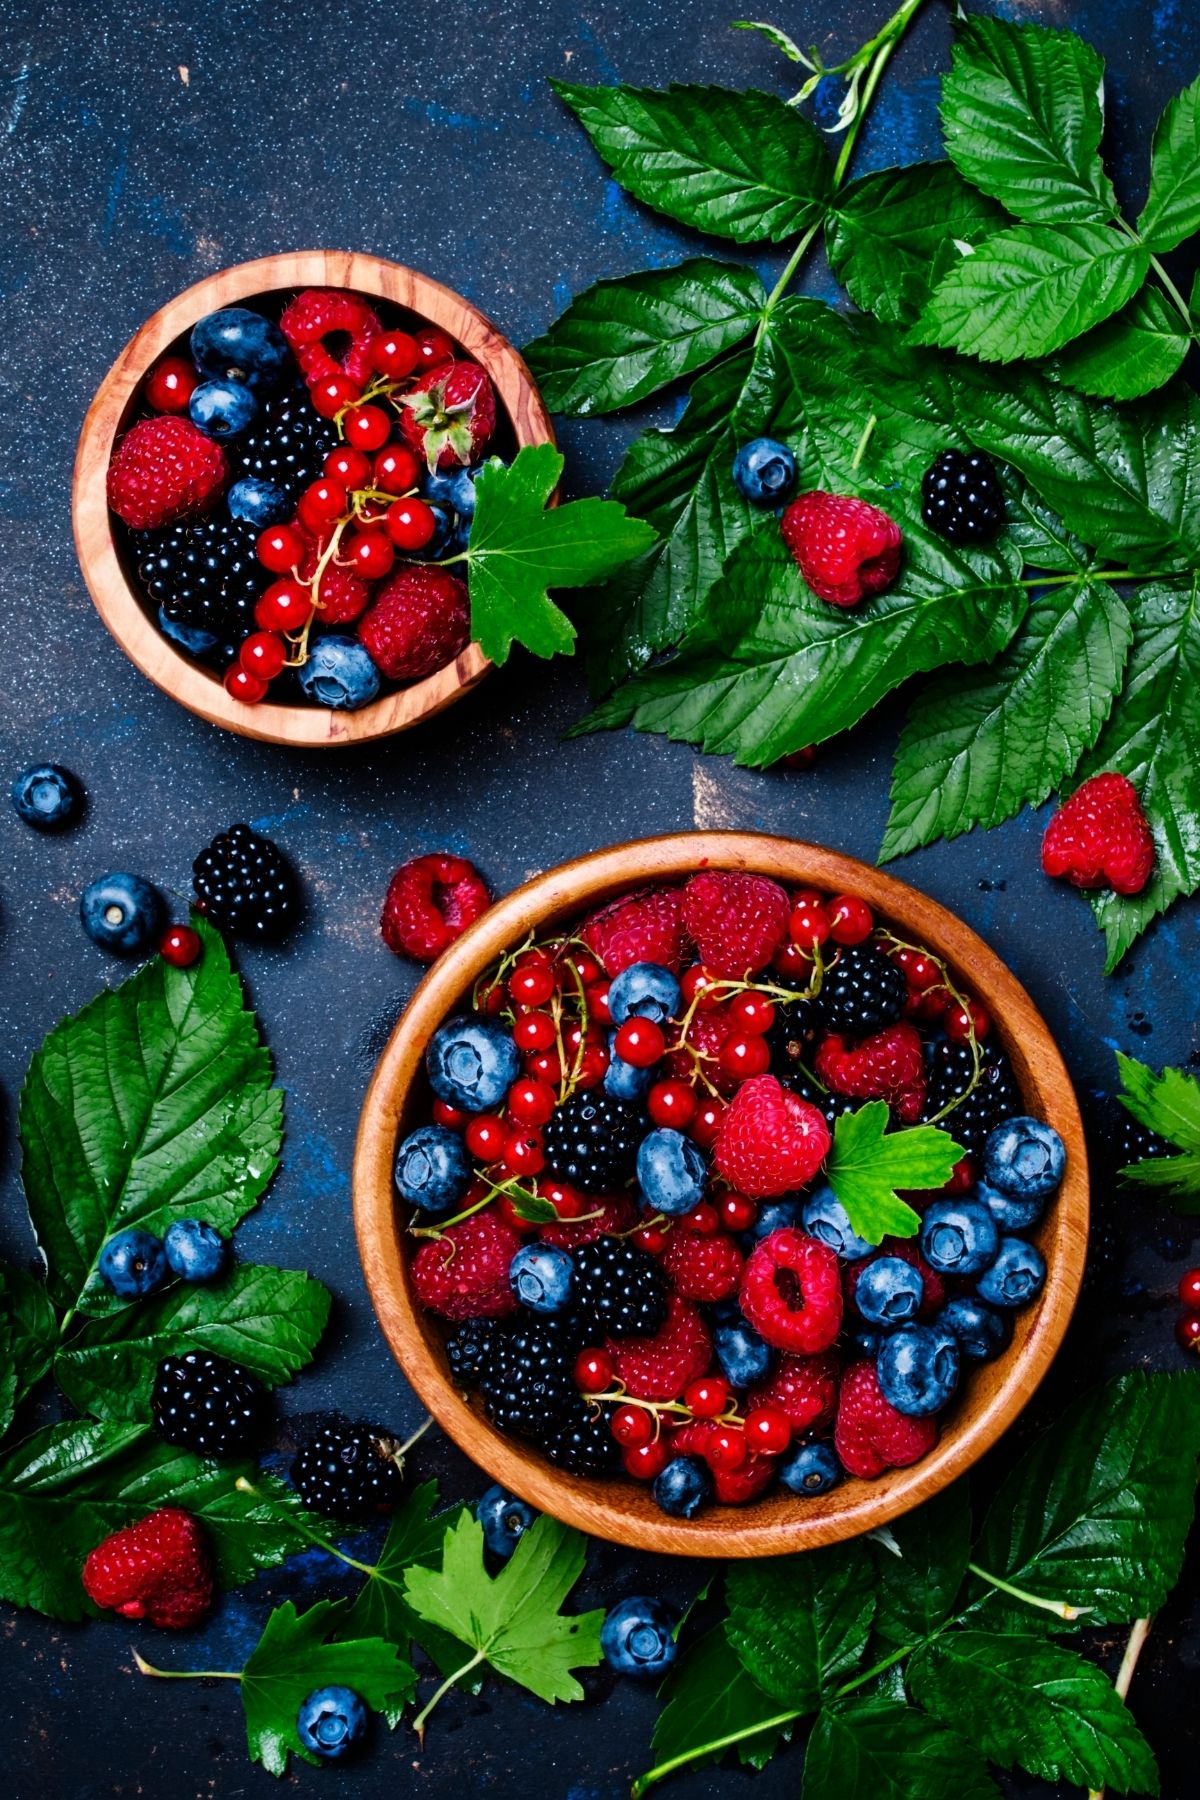 two bowls of berries on a table.